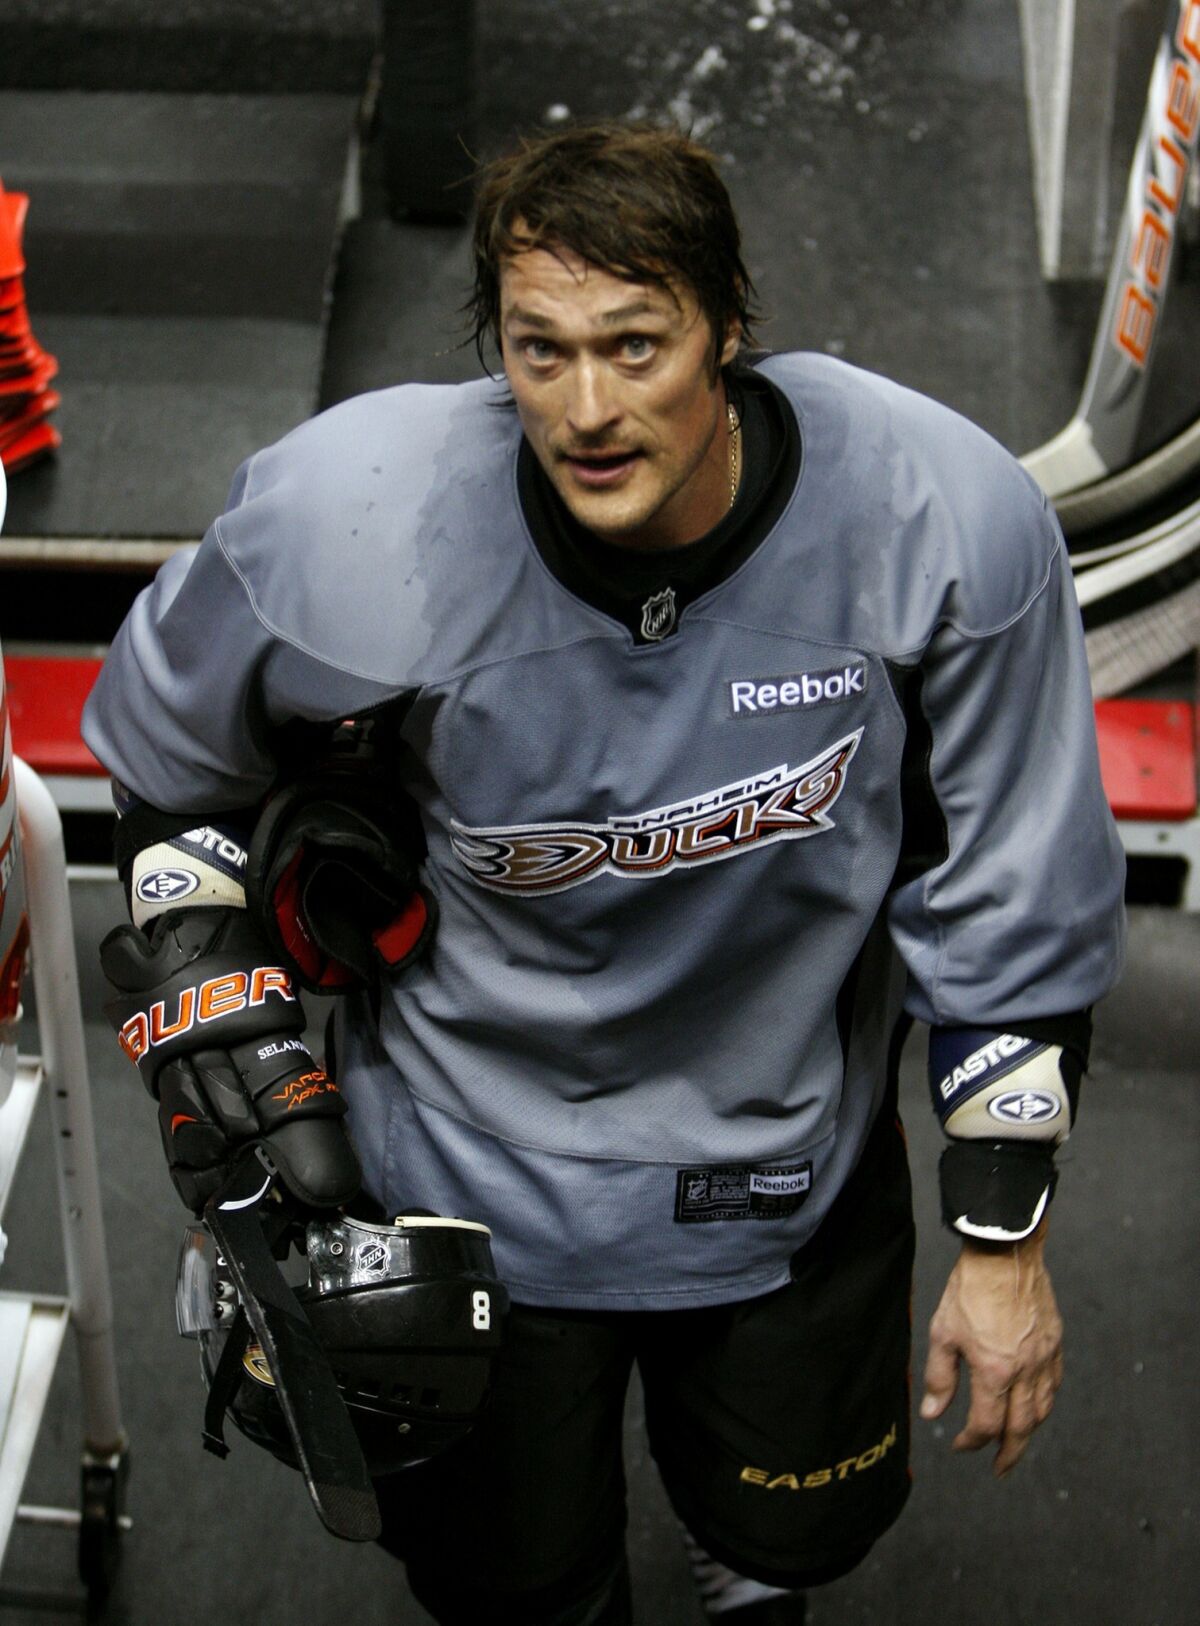 Will veteran forward Teemu Selanne be able to improve on last season's numbers for the Ducks in 2013-14?